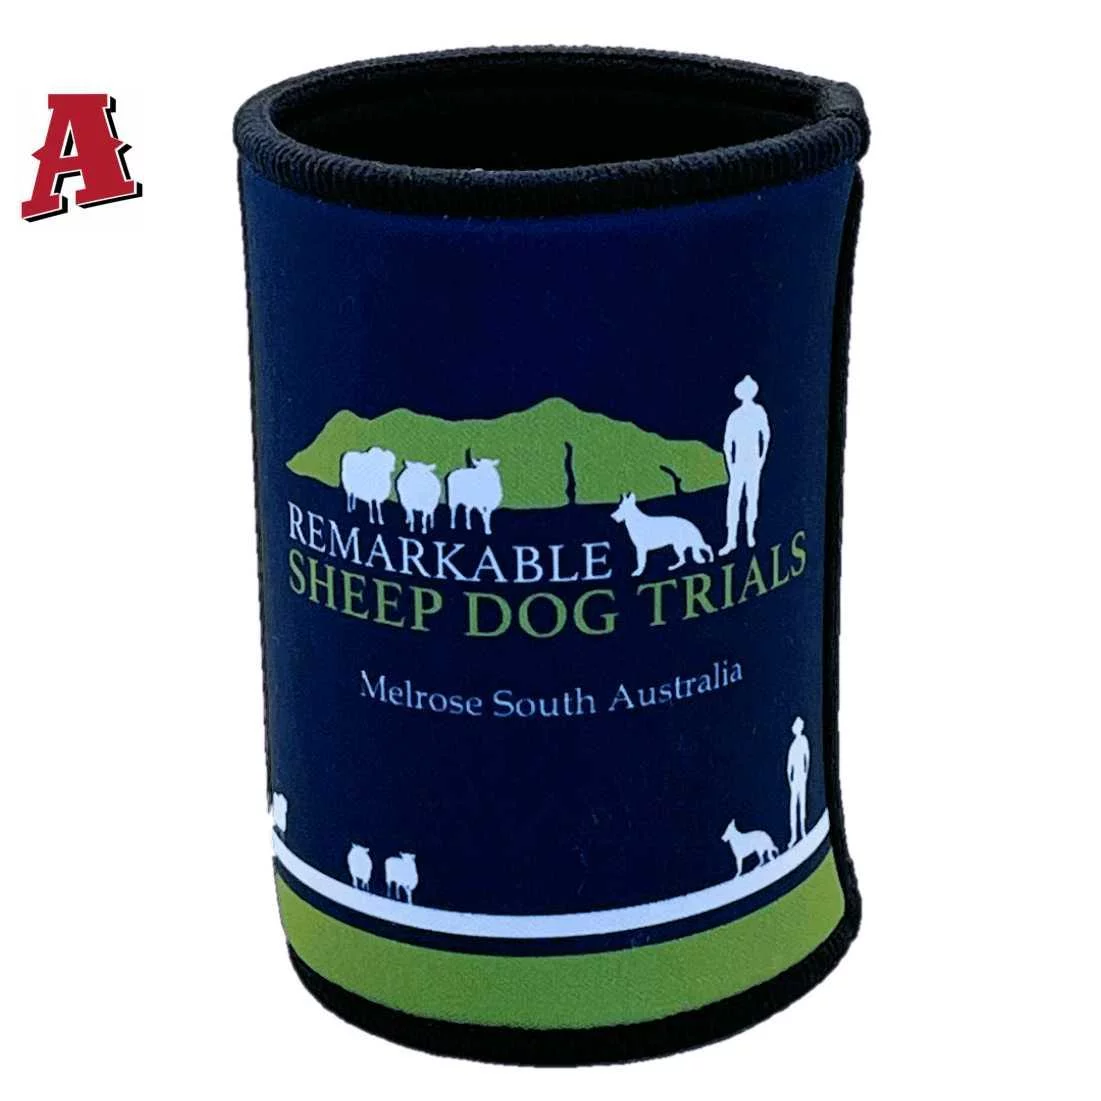 Remarkable Sheep Dog Trials Melrose SA Aussie Custom Stubby Holders - Koozie - 5mm Premium Neoprene with Taped & Stitched Seams Navy